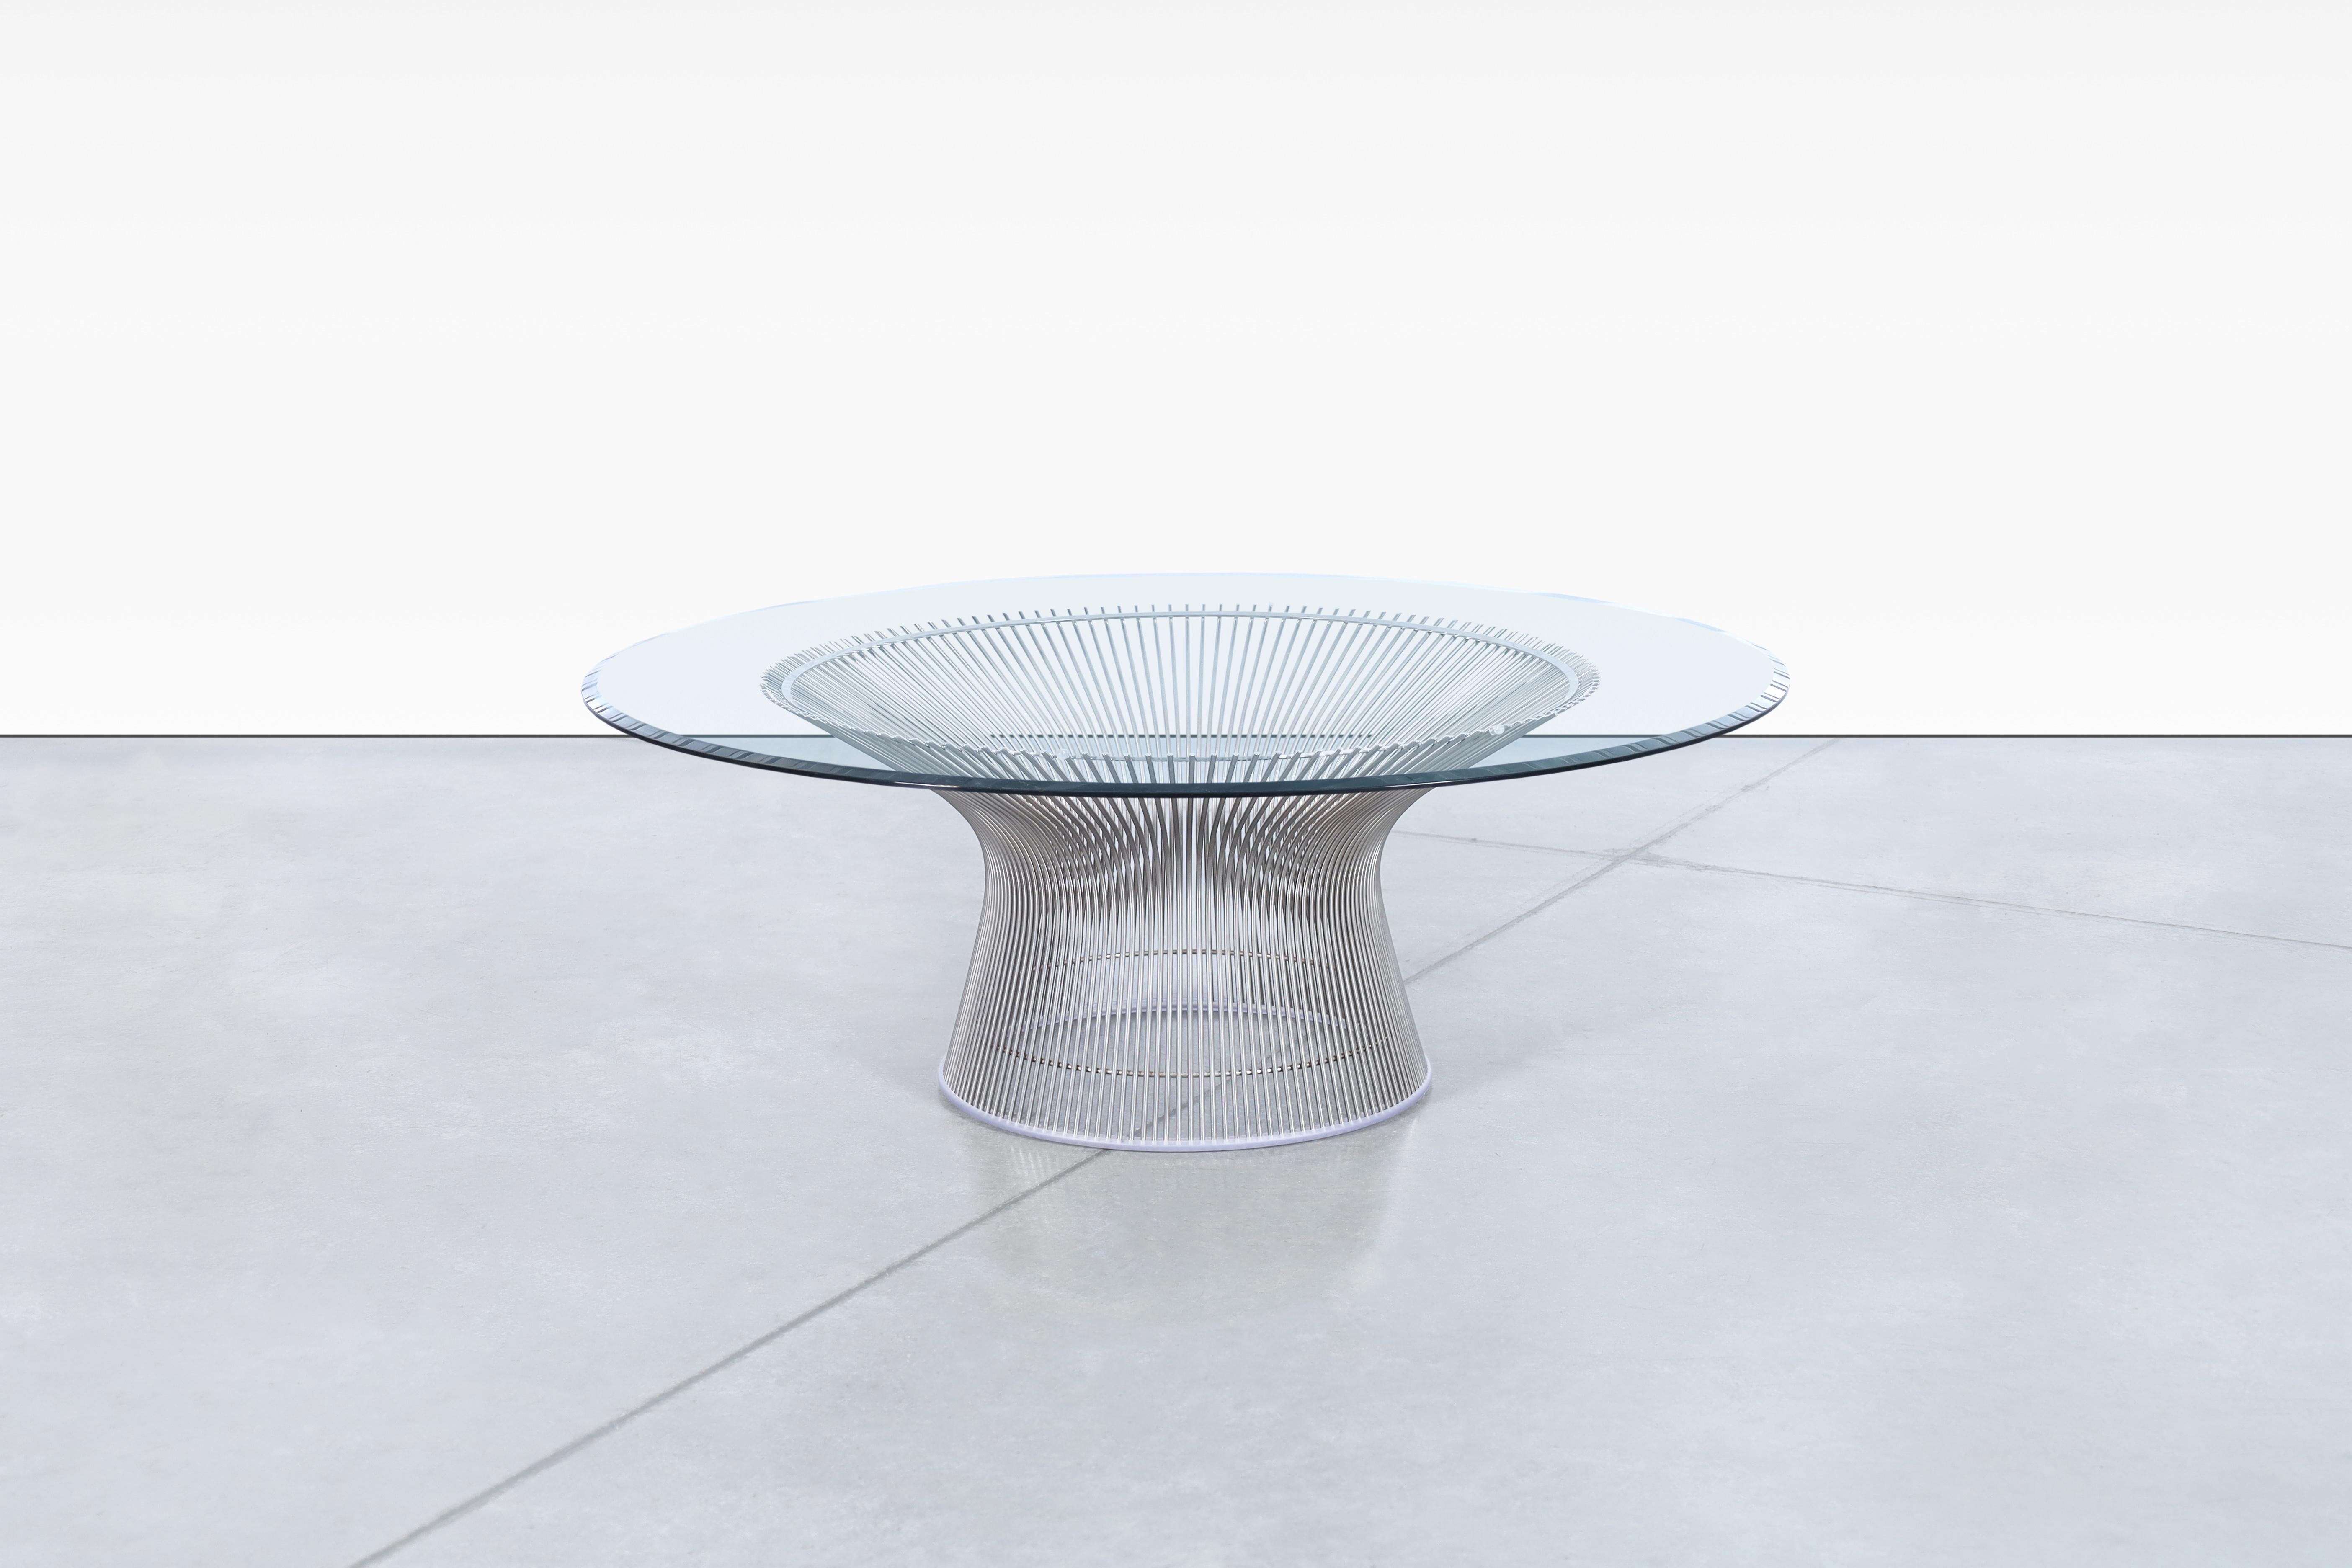 The polished nickel coffee table was designed by Warren Platner and produced by Knoll, making it a piece of furniture that is both stylish and well-crafted. The table was constructed with several curved steel rods that were welded to circular